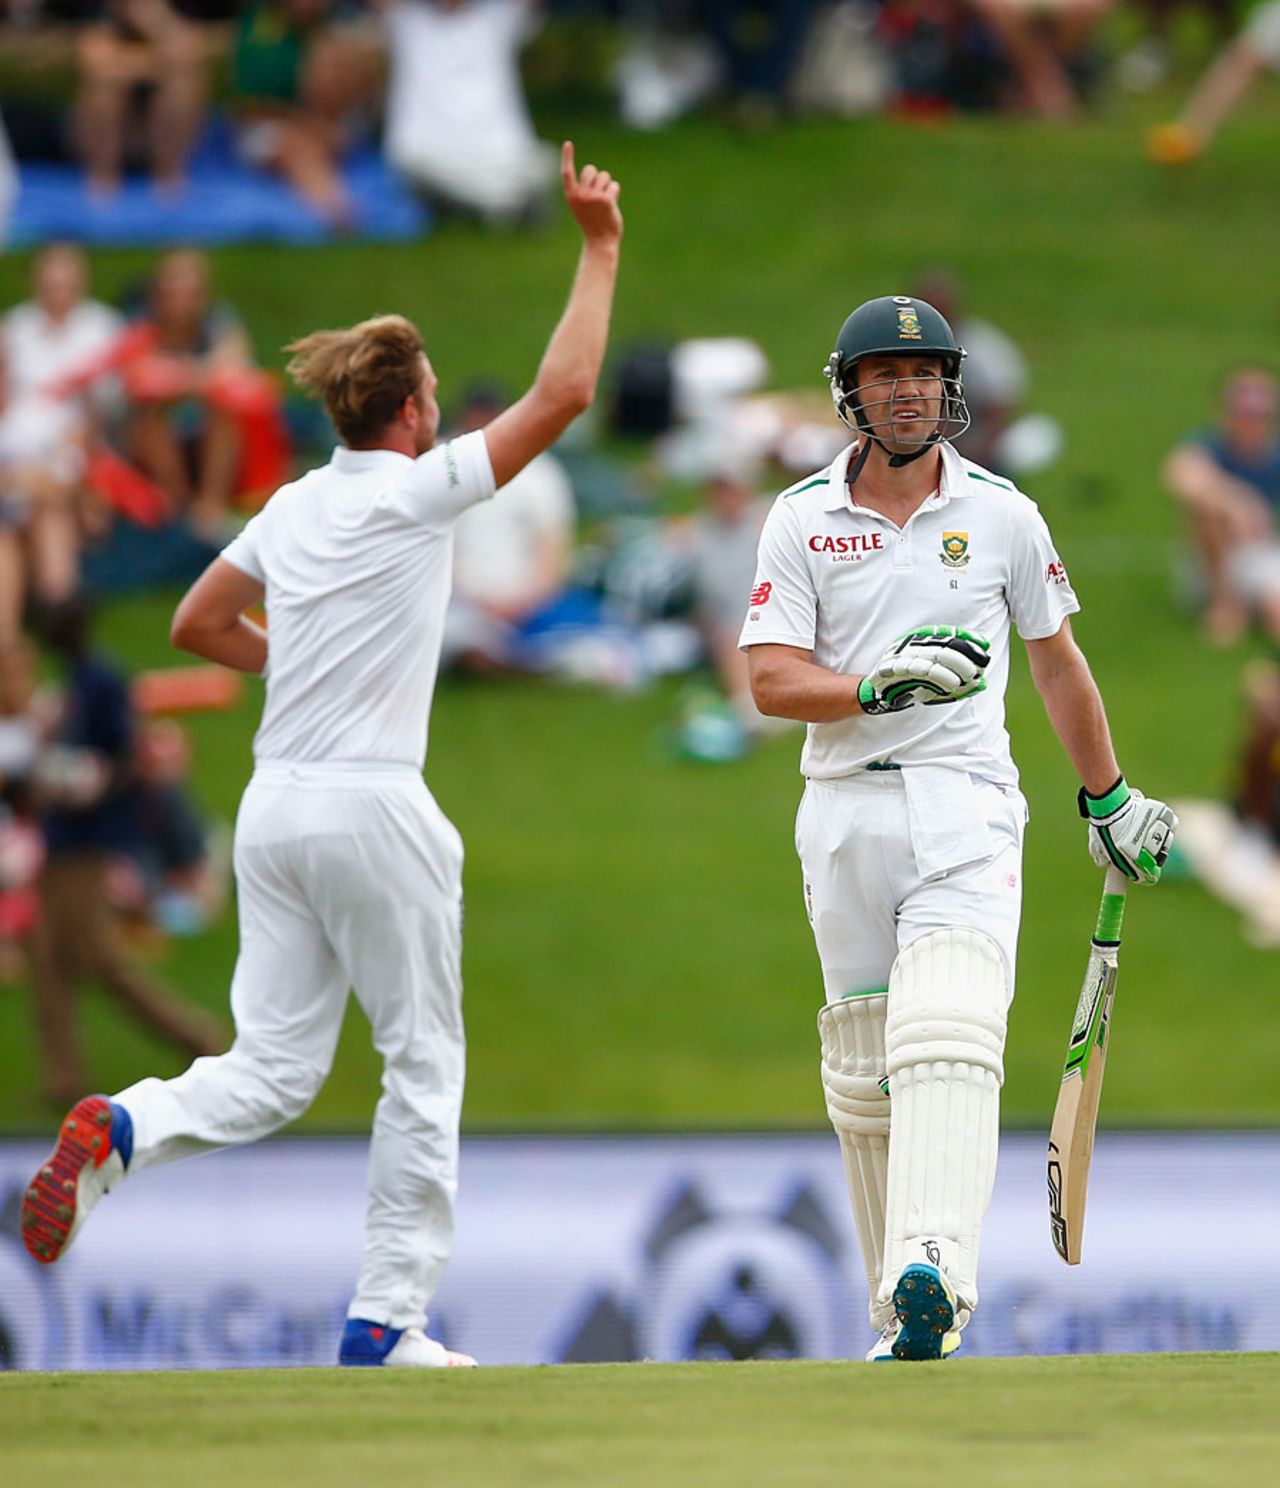 Stuart Broad again removed AB de Villiers for a duck, South Africa v England, 4th Test, Centurion, 1st day, January 22, 2016